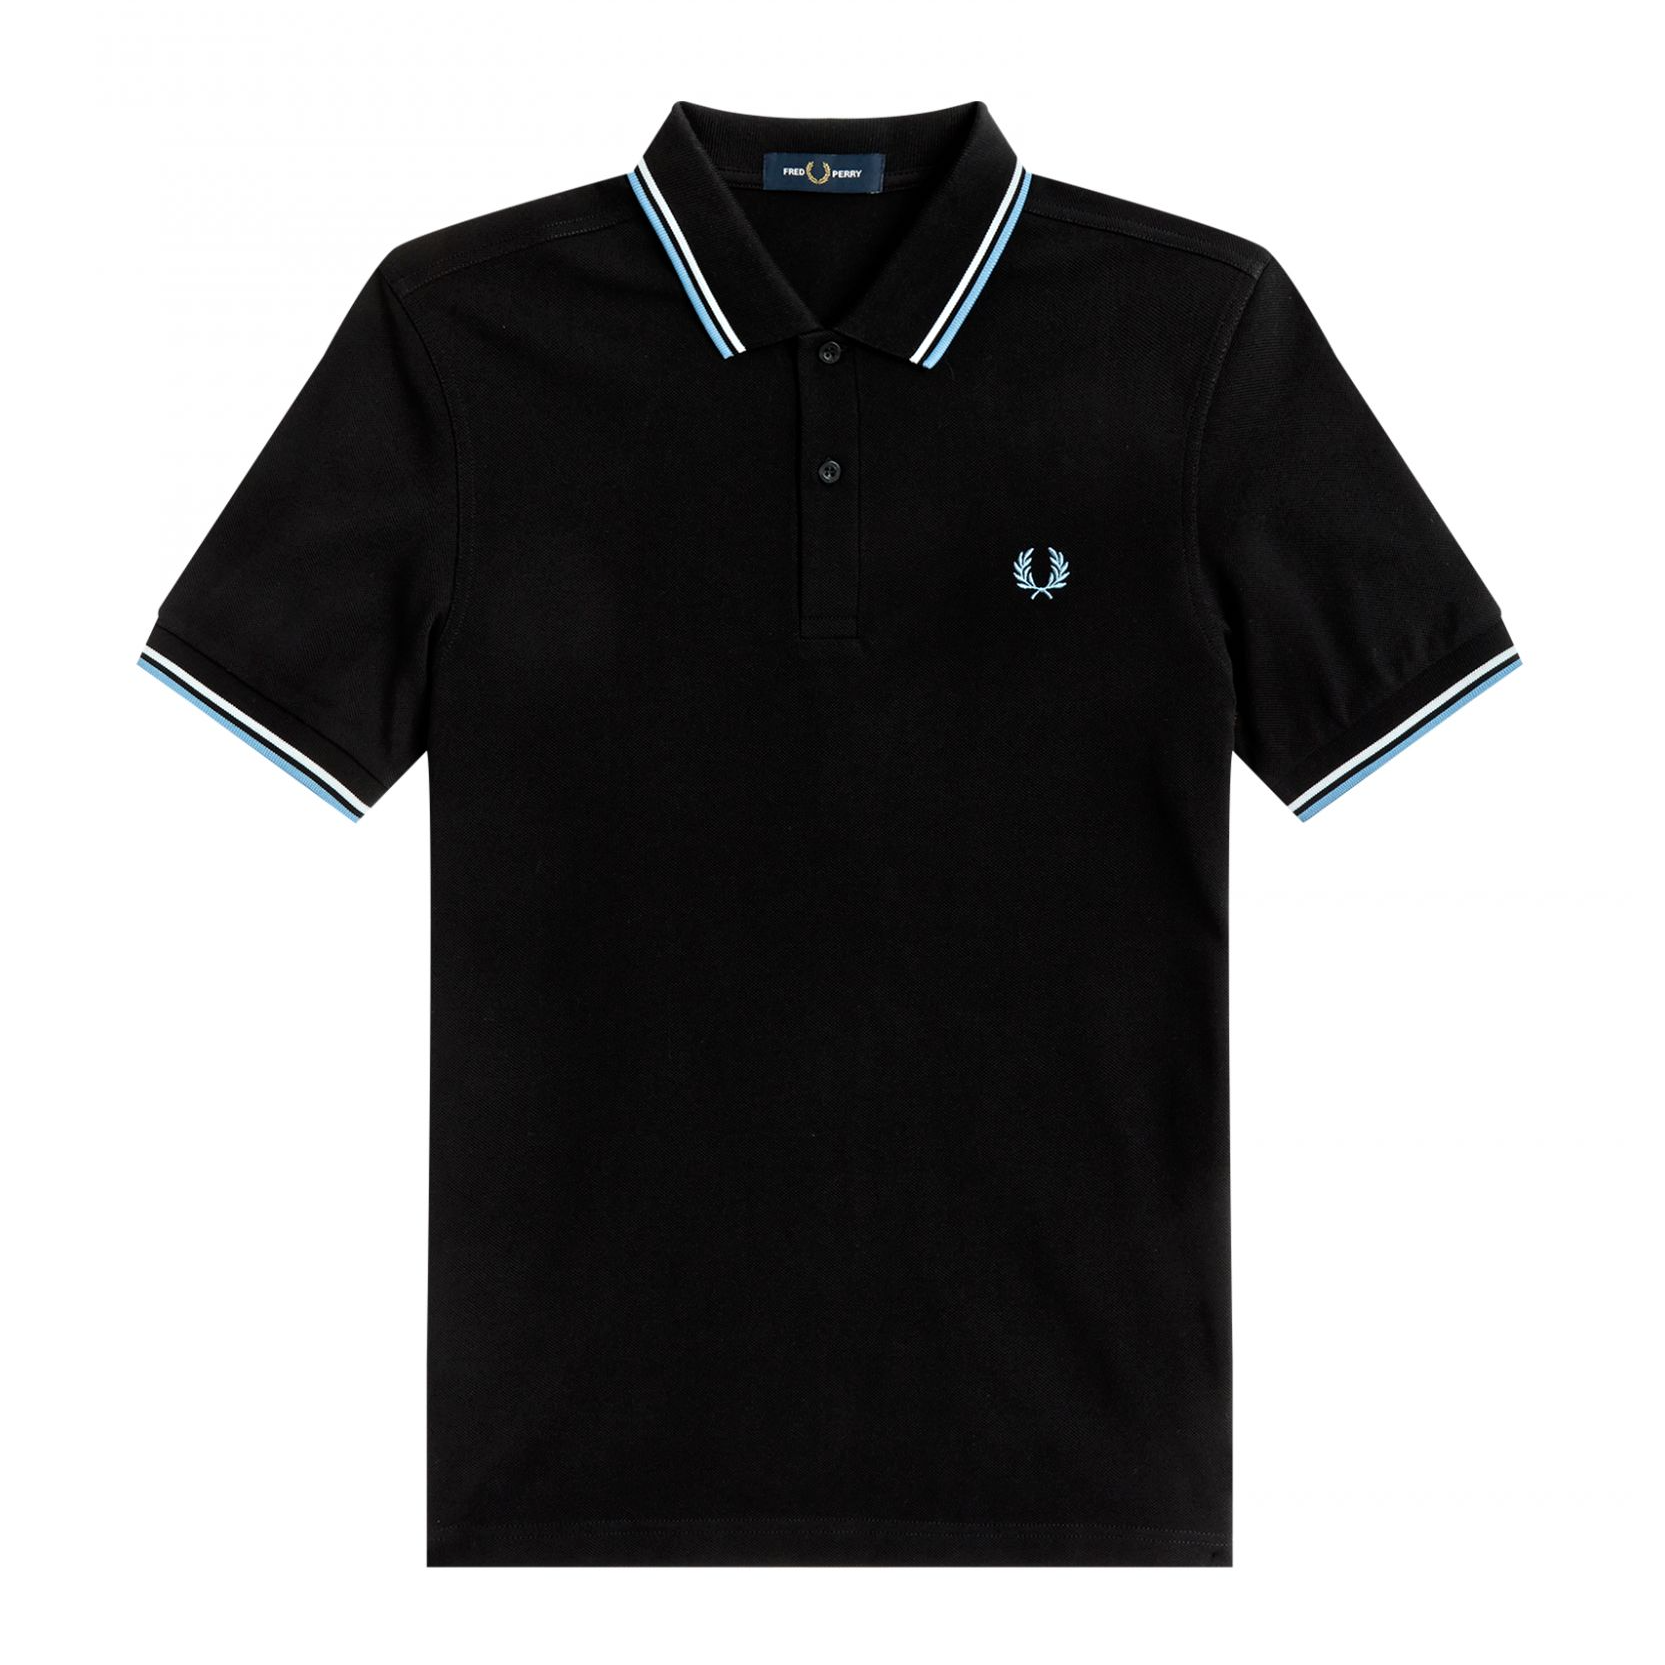 Mentaliteit Vertolking microscoop FRED PERRY TWIN TIPPED POLO SHIRT BLK/WHT/SKY